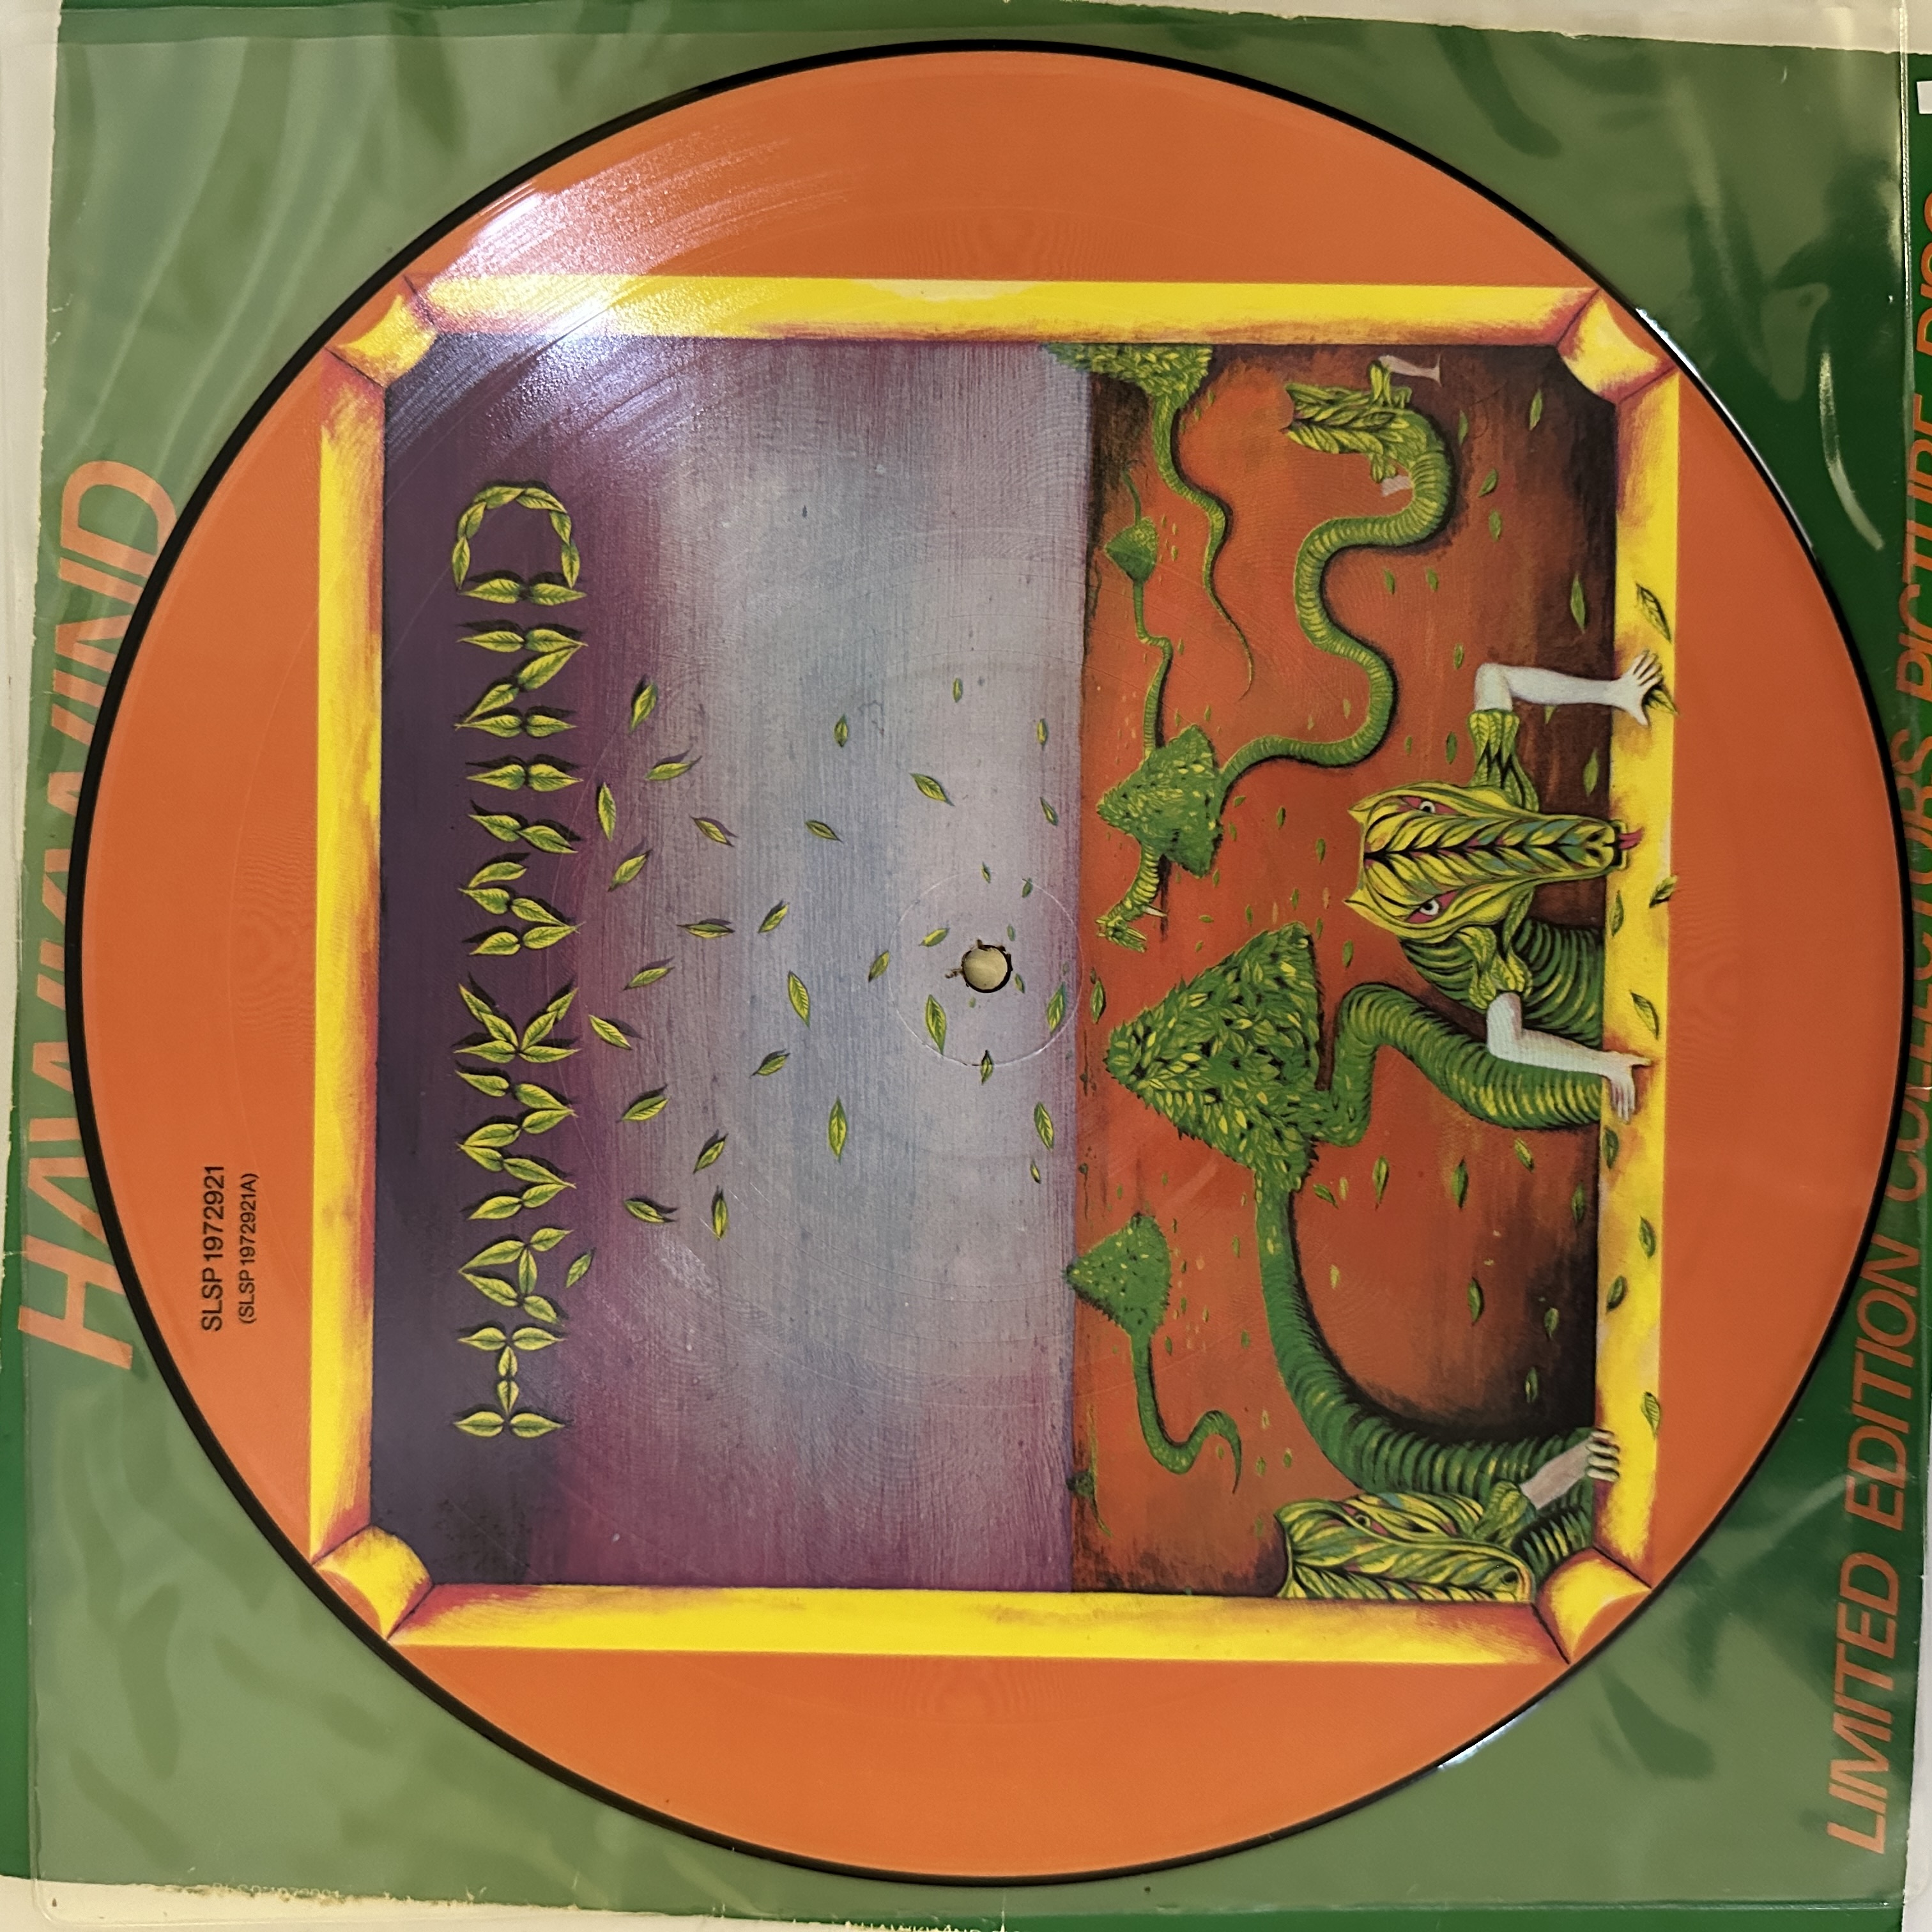 Hawkwind limited edition picture disc - Image 6 of 8